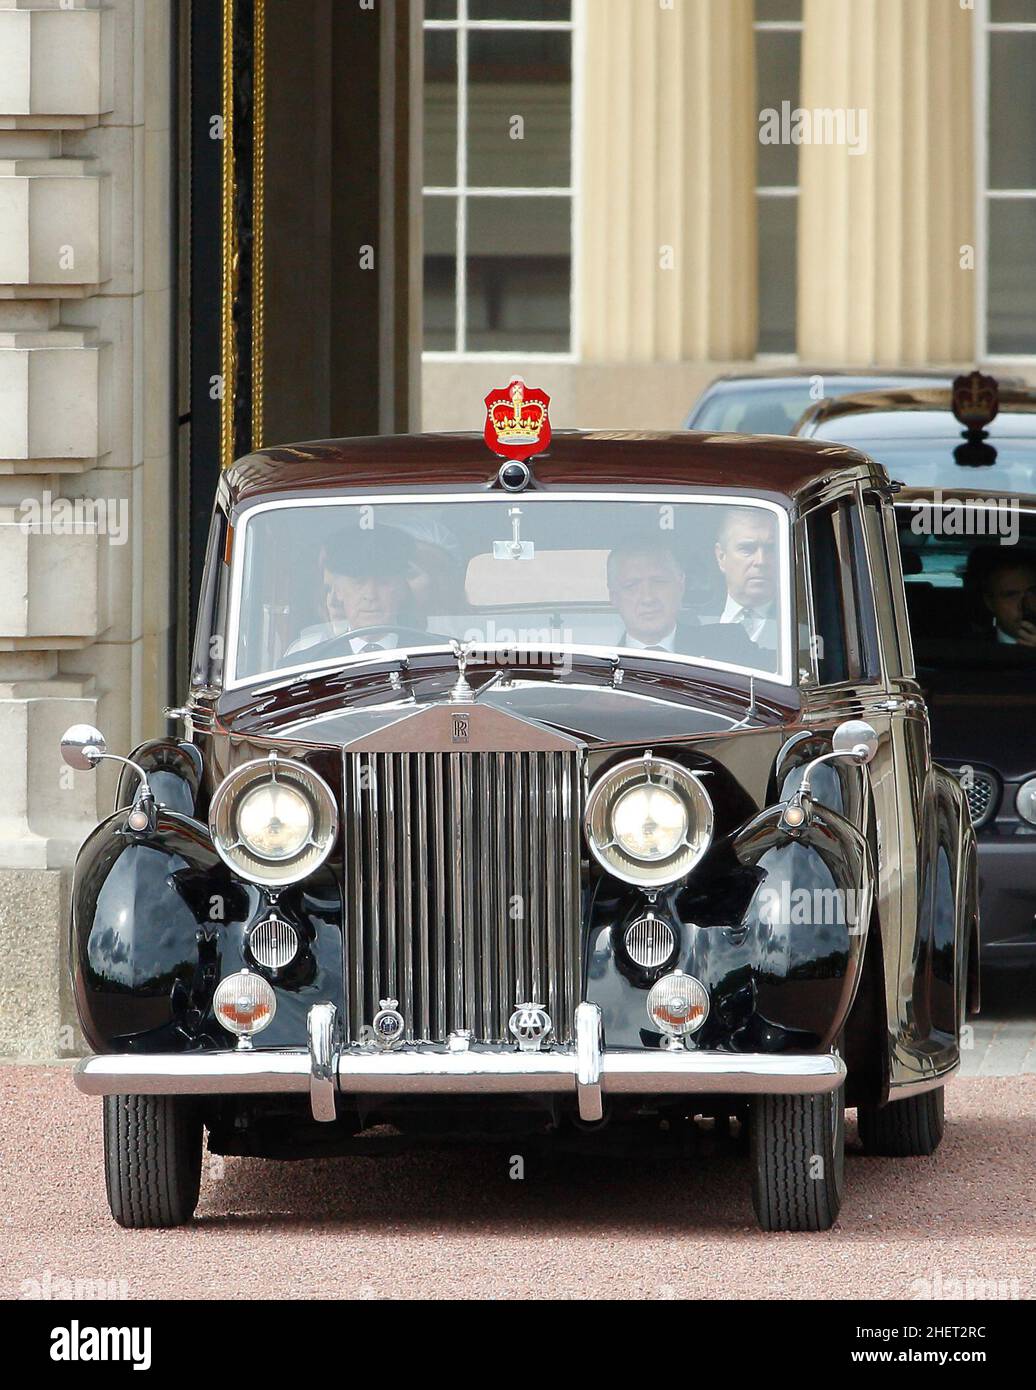 Prince Andrew the Queen's son accompanied by his daughters Princess Eugenie and Princess Beatrice as they leave Buckingham Palace by immaculate vintage Rolls Royce to commemorate the 60th anniversary of the accession of the Queen, London. 5 June 2012 --- Image by © Paul Cunningham Stock Photo